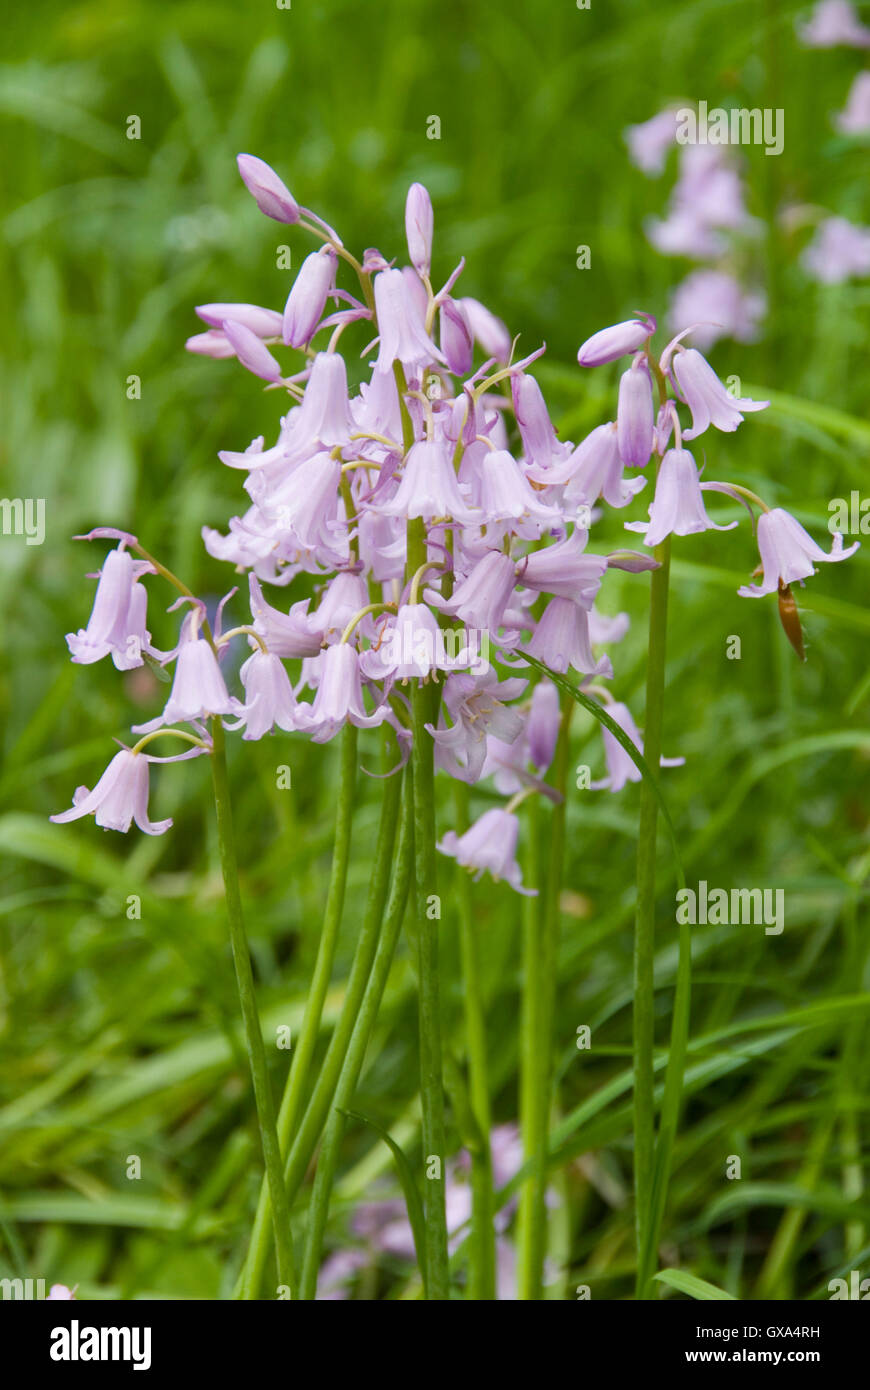 Spanish pink bell flowers : the Spanish Hyacinthoides hispanica is threat to the native bluebell population, Sheffield, UK Stock Photo